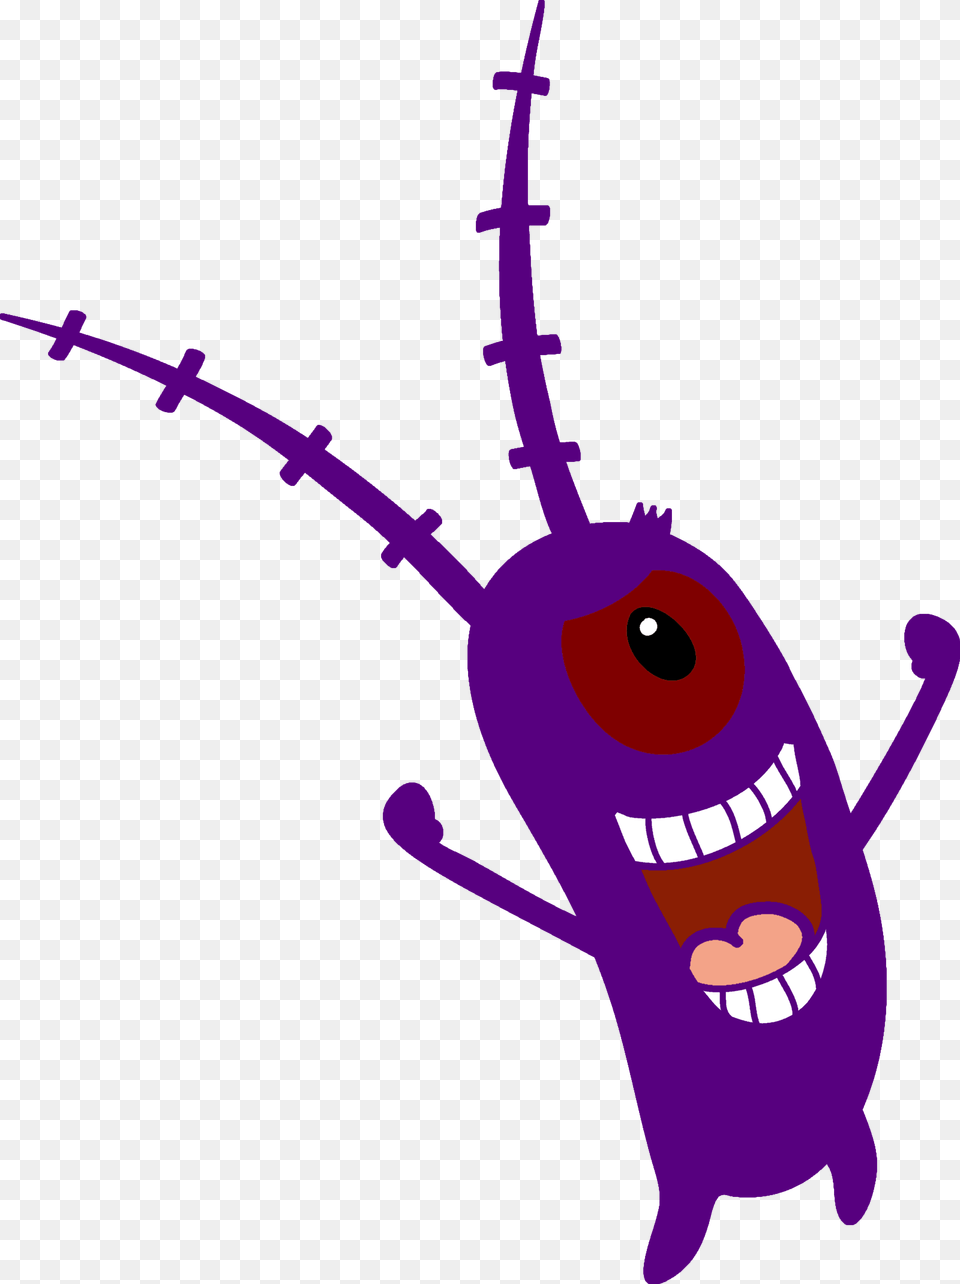 Happy Spooktober From Jbw, Animal, Cockroach, Insect, Invertebrate Png Image